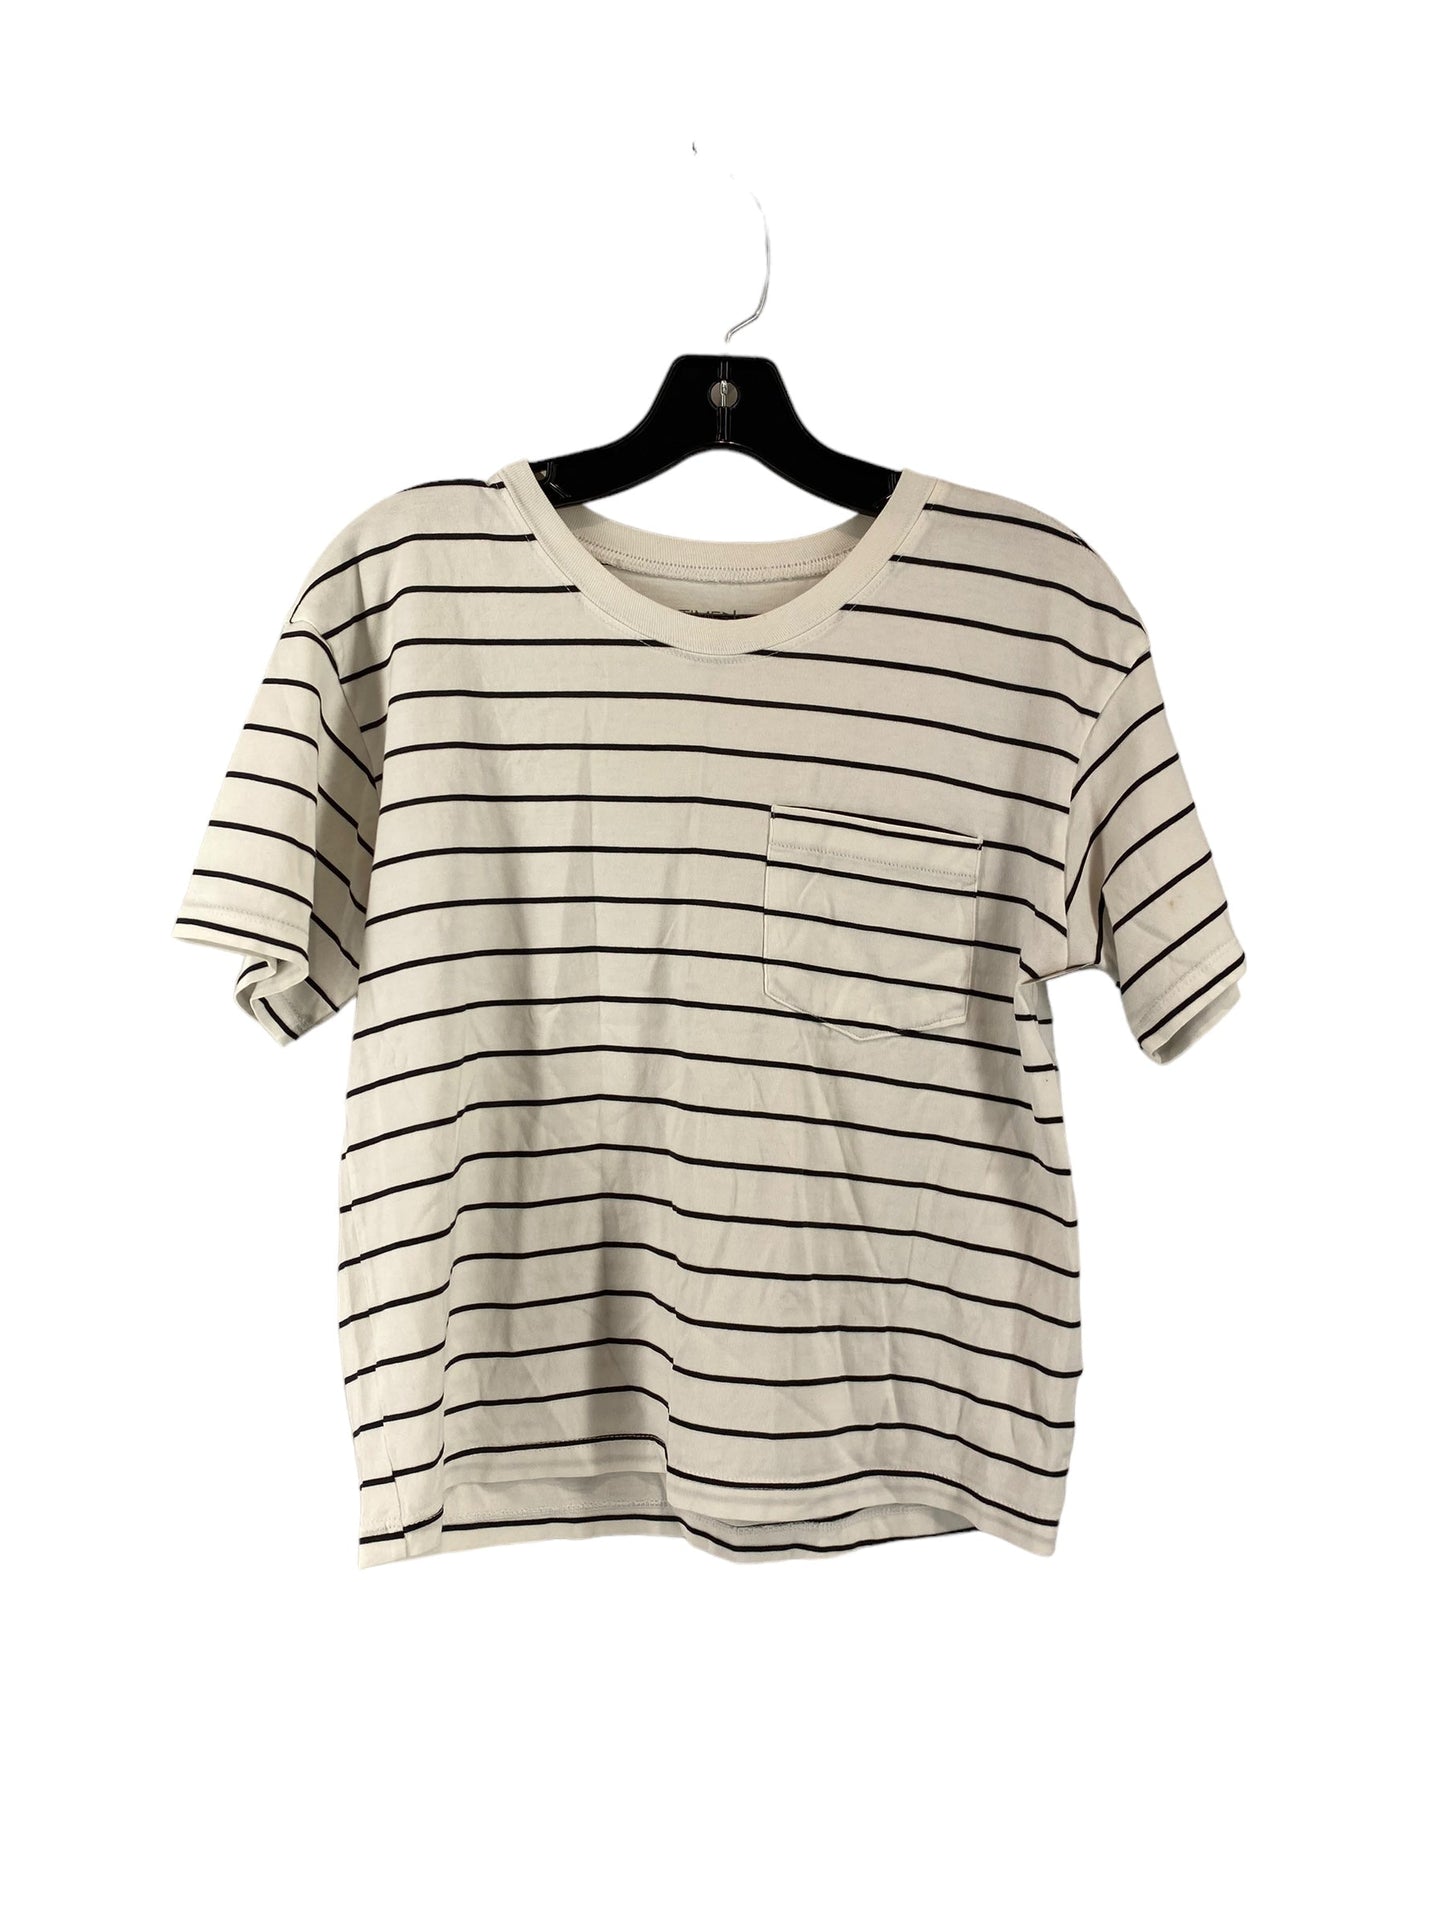 Striped Pattern Top Short Sleeve Time And Tru, Size S